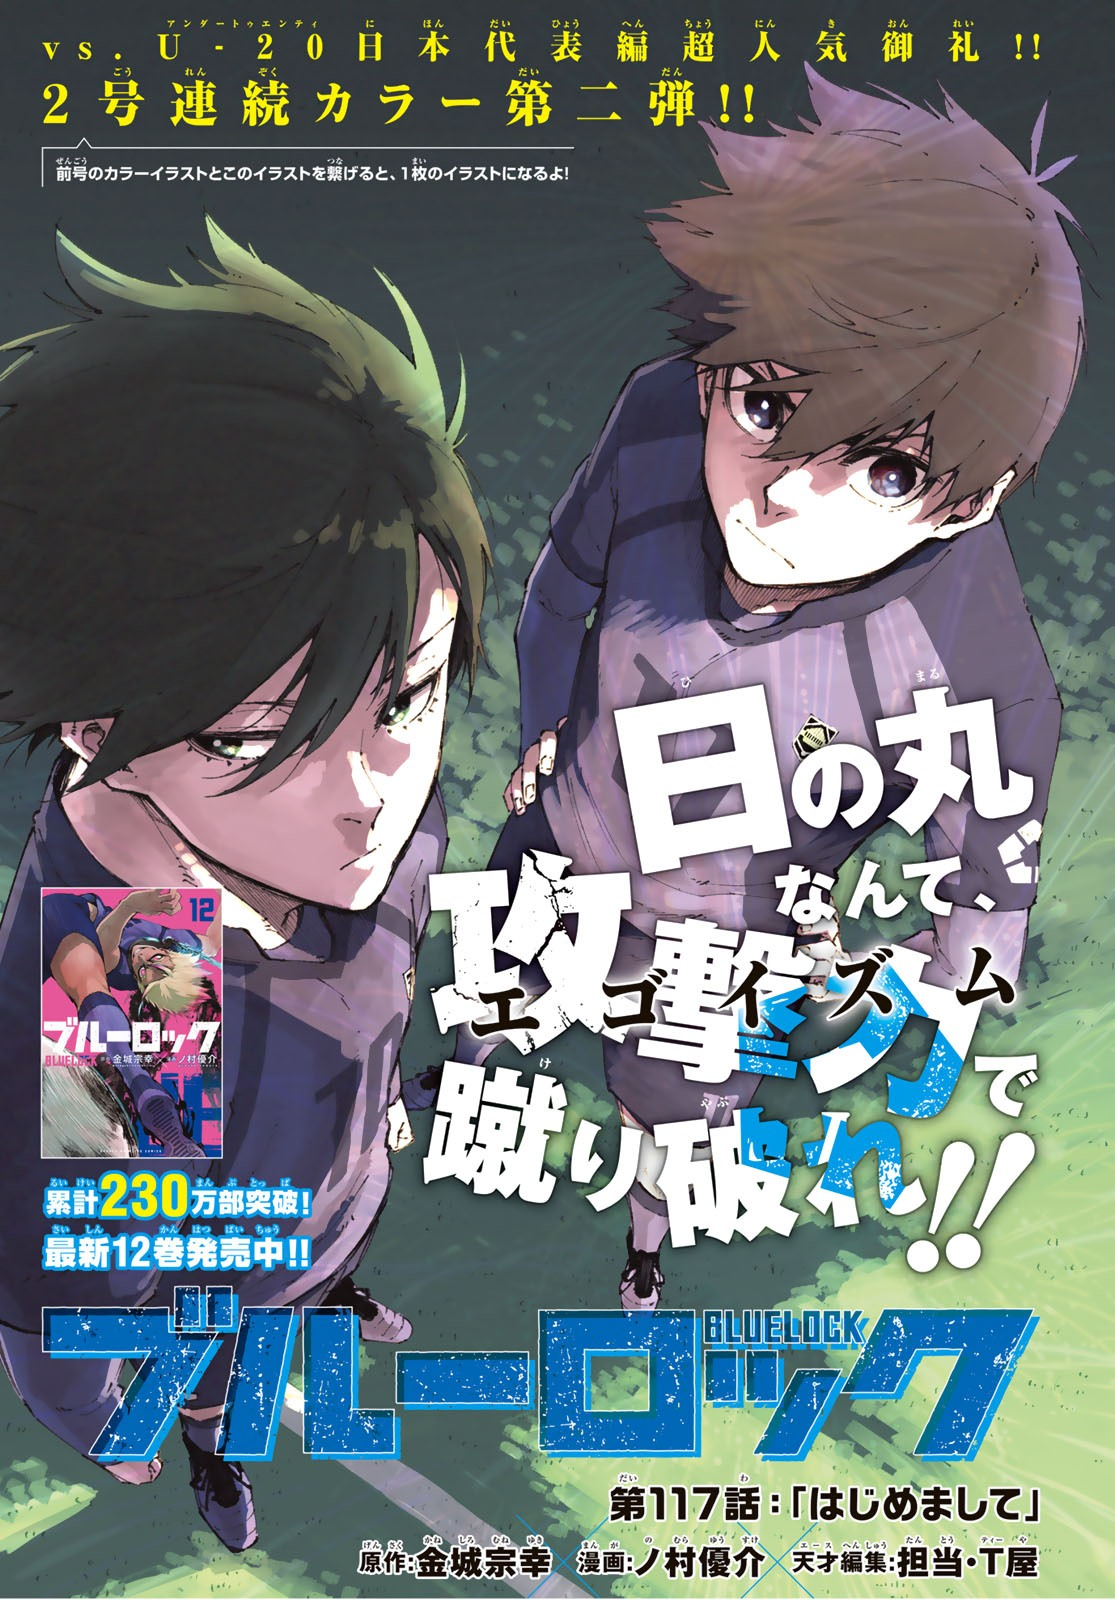 Blue Lock Chapter 237 Spoiler: Isagi's New Formula - Latest Anime/Gaming  News, Characters, Series, Updates & more.